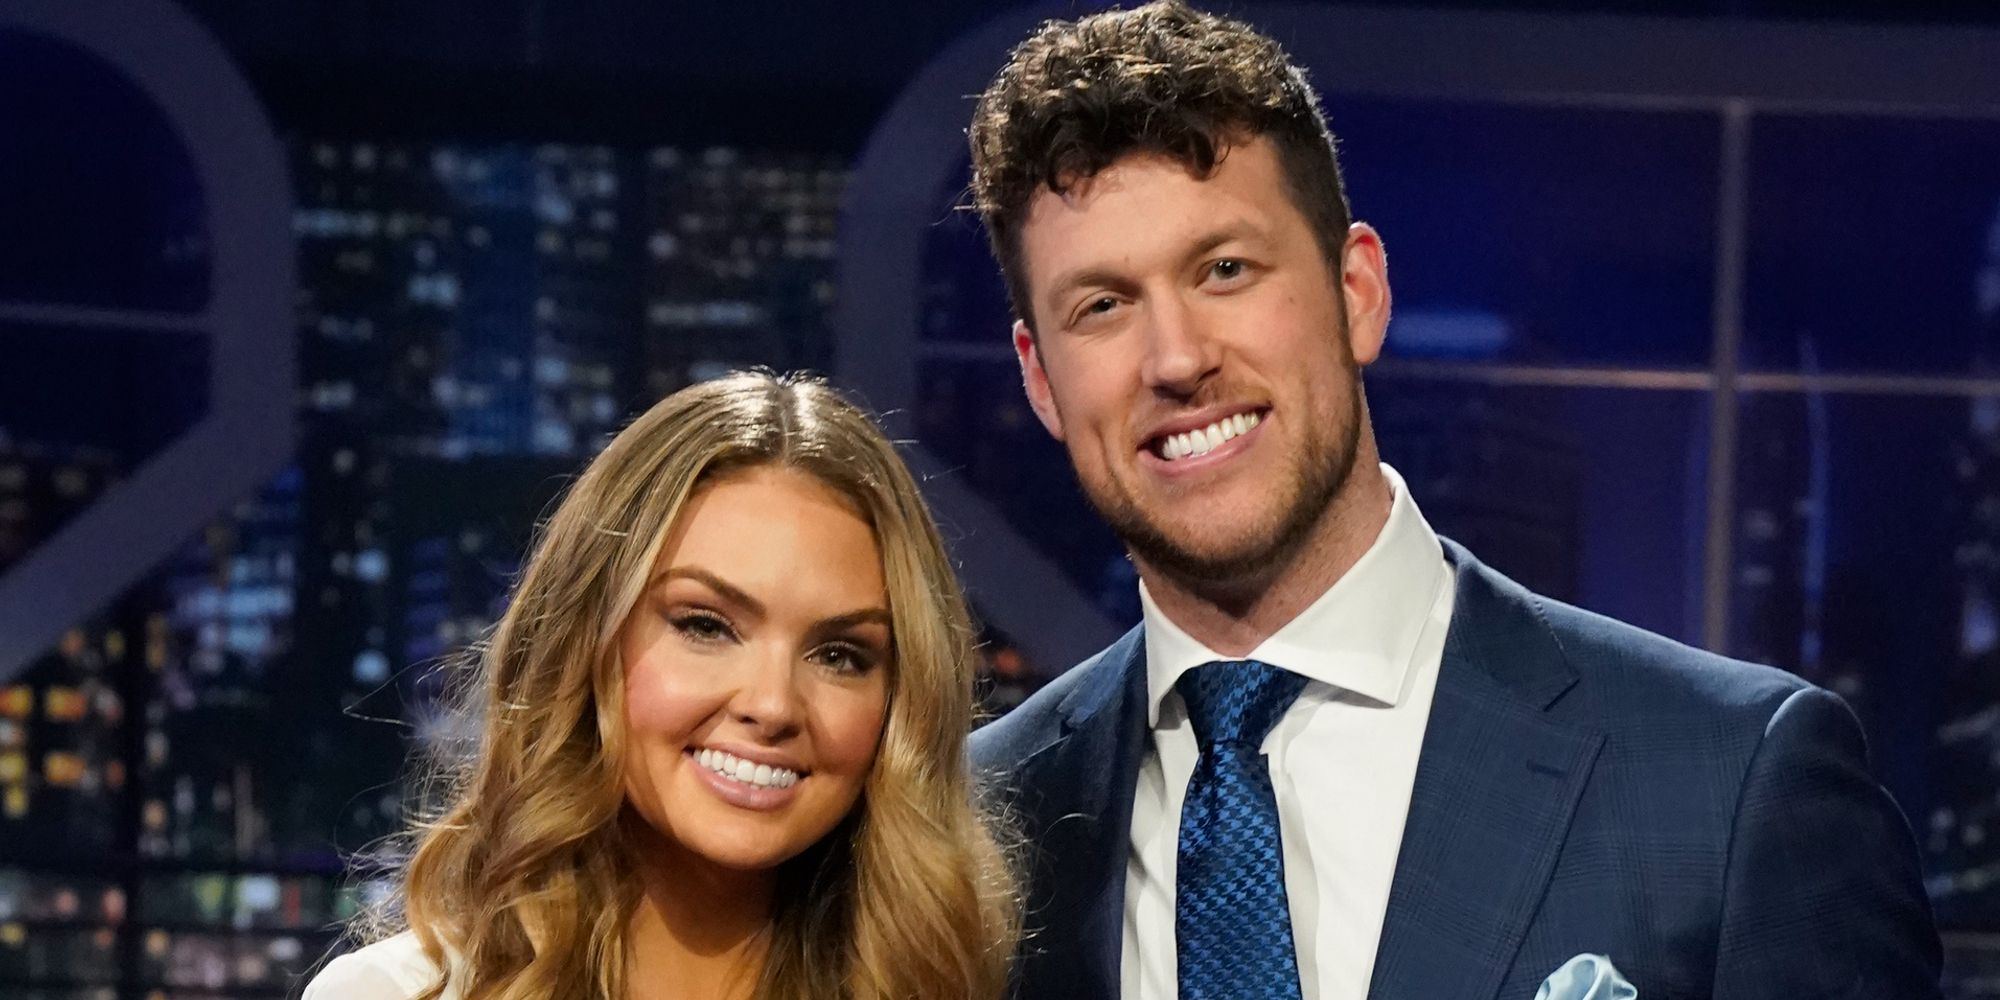 Susie Evans and Clayton Echard on The Bachelor season 26 finale